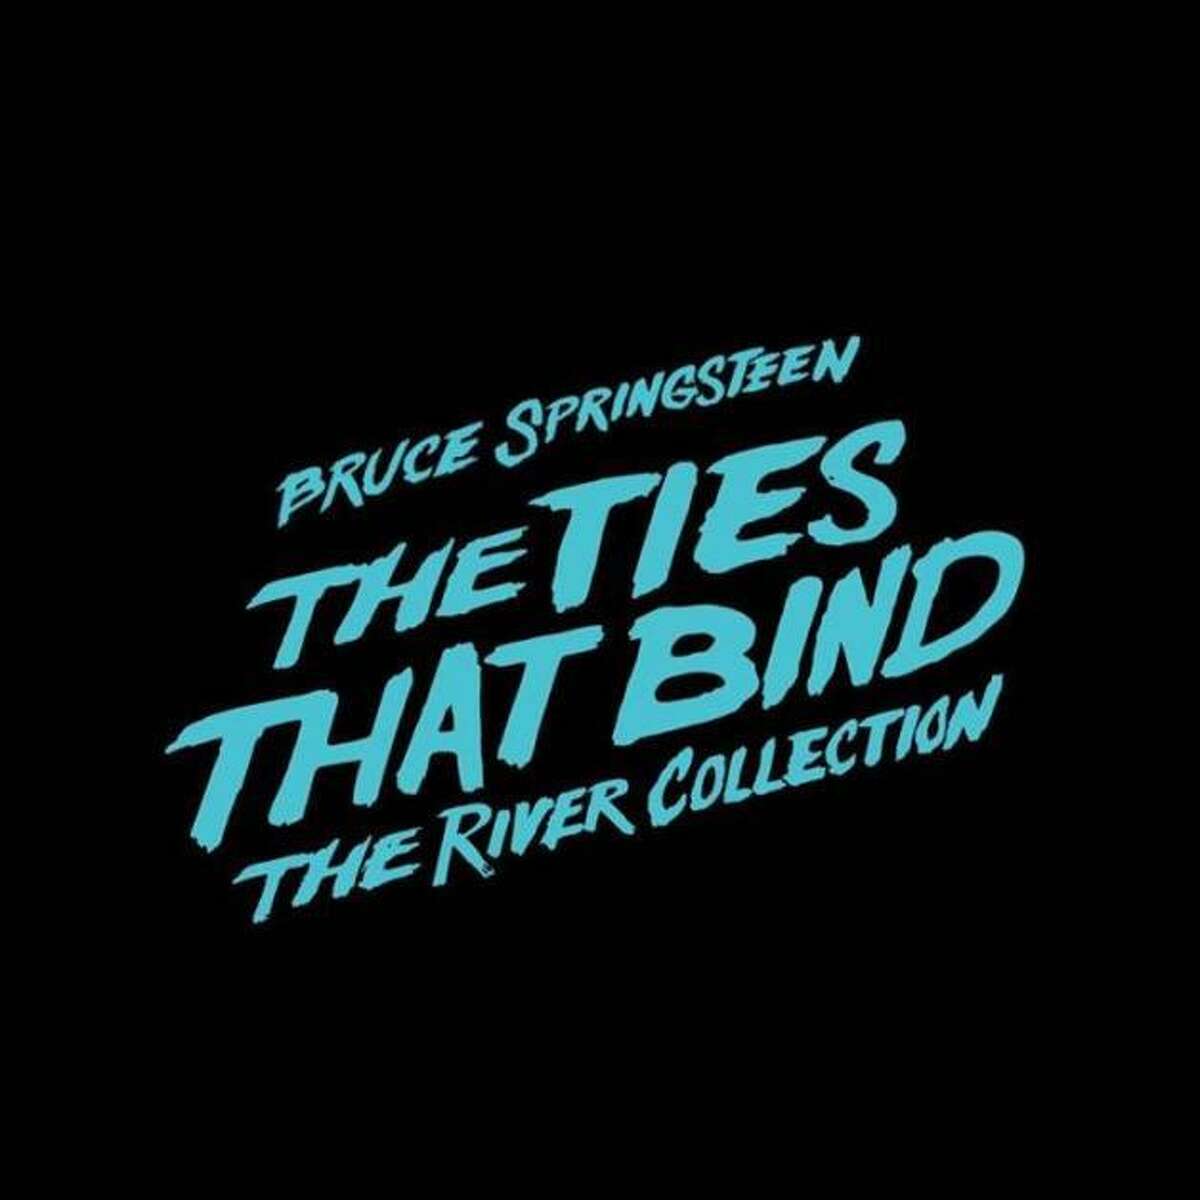 Bruce Springsteen and the E Street Band: "The Ties That Bind, The River Collection."